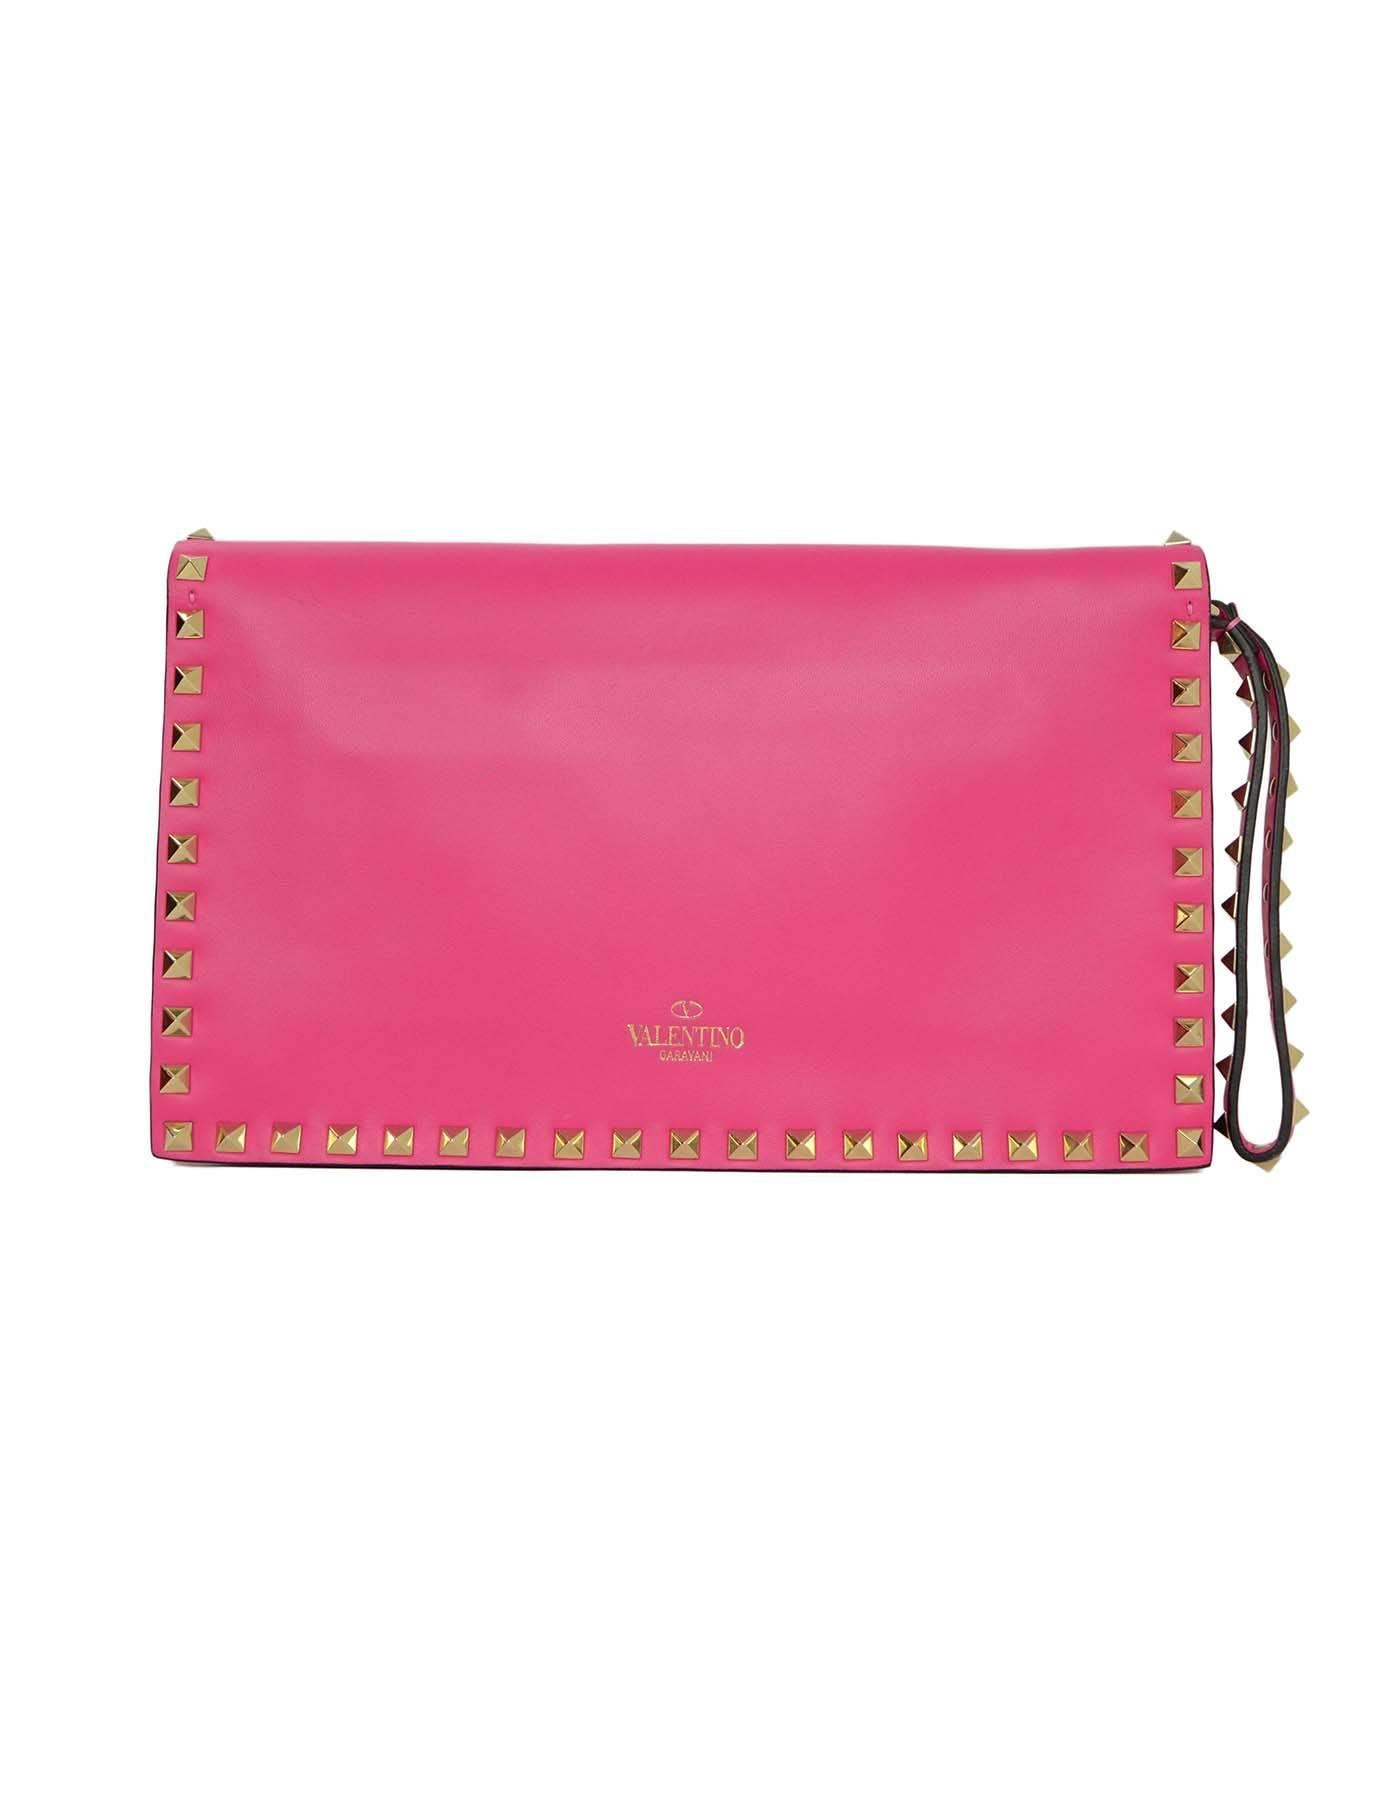 Valentino Hot Pink Leather Rockstud Flap Clutch SHW
Features flap top with iconic Valentino pyramid studs.  Can be worn as a wristlet or clutch

Made In: Italy
Color: Hot Pink
Hardware: Silvertone
Materials: Leather and metal
Lining: Beige